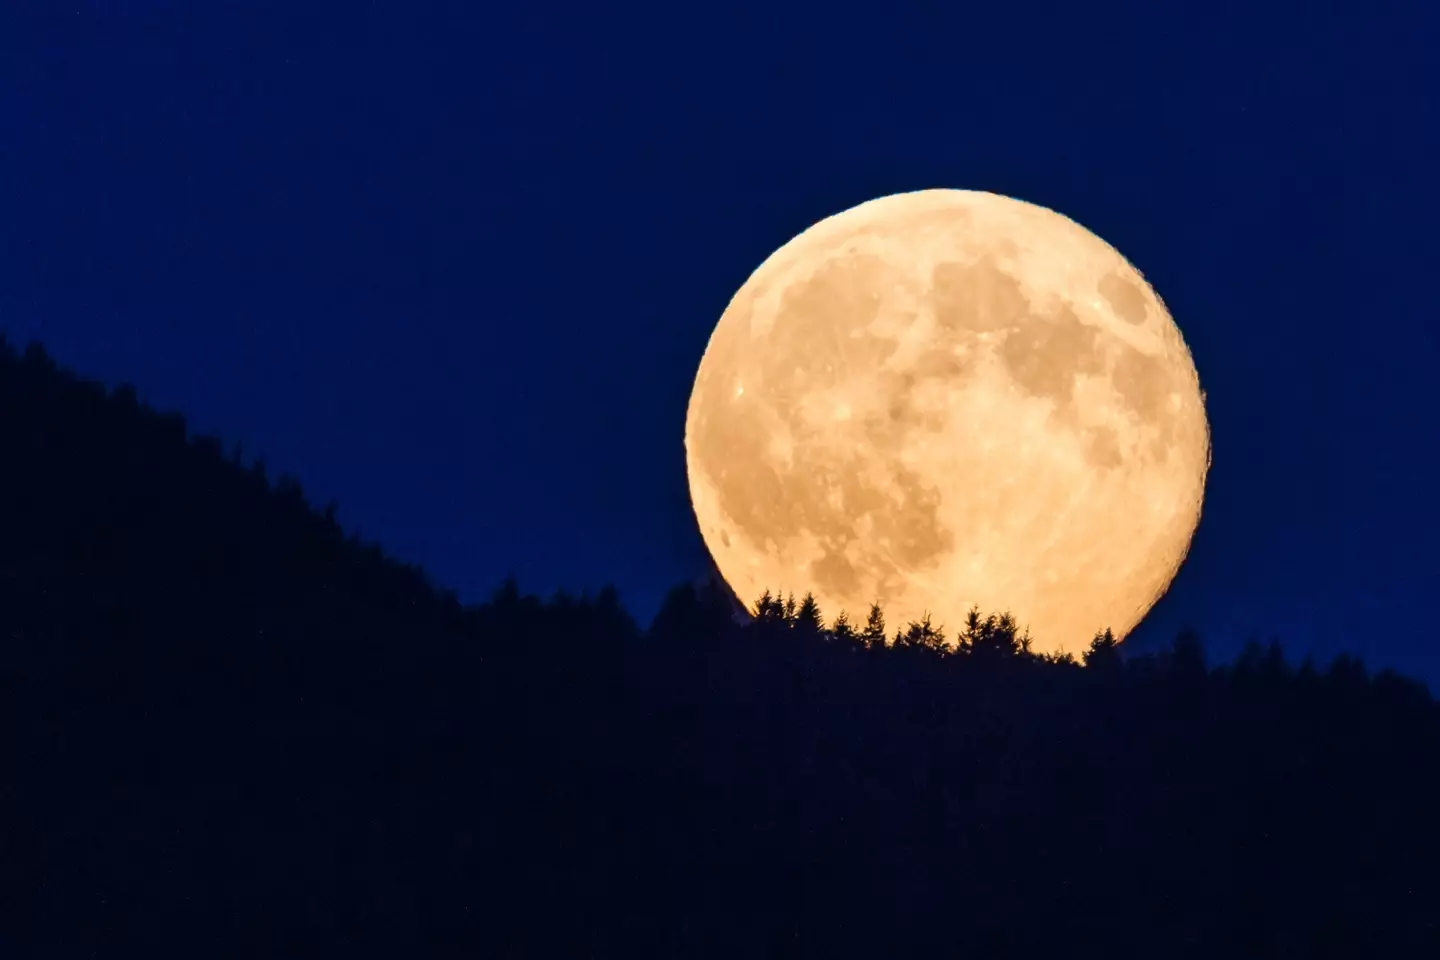 Keep an eye on the sky on Wednesday (30 August) to catch the lunar event.